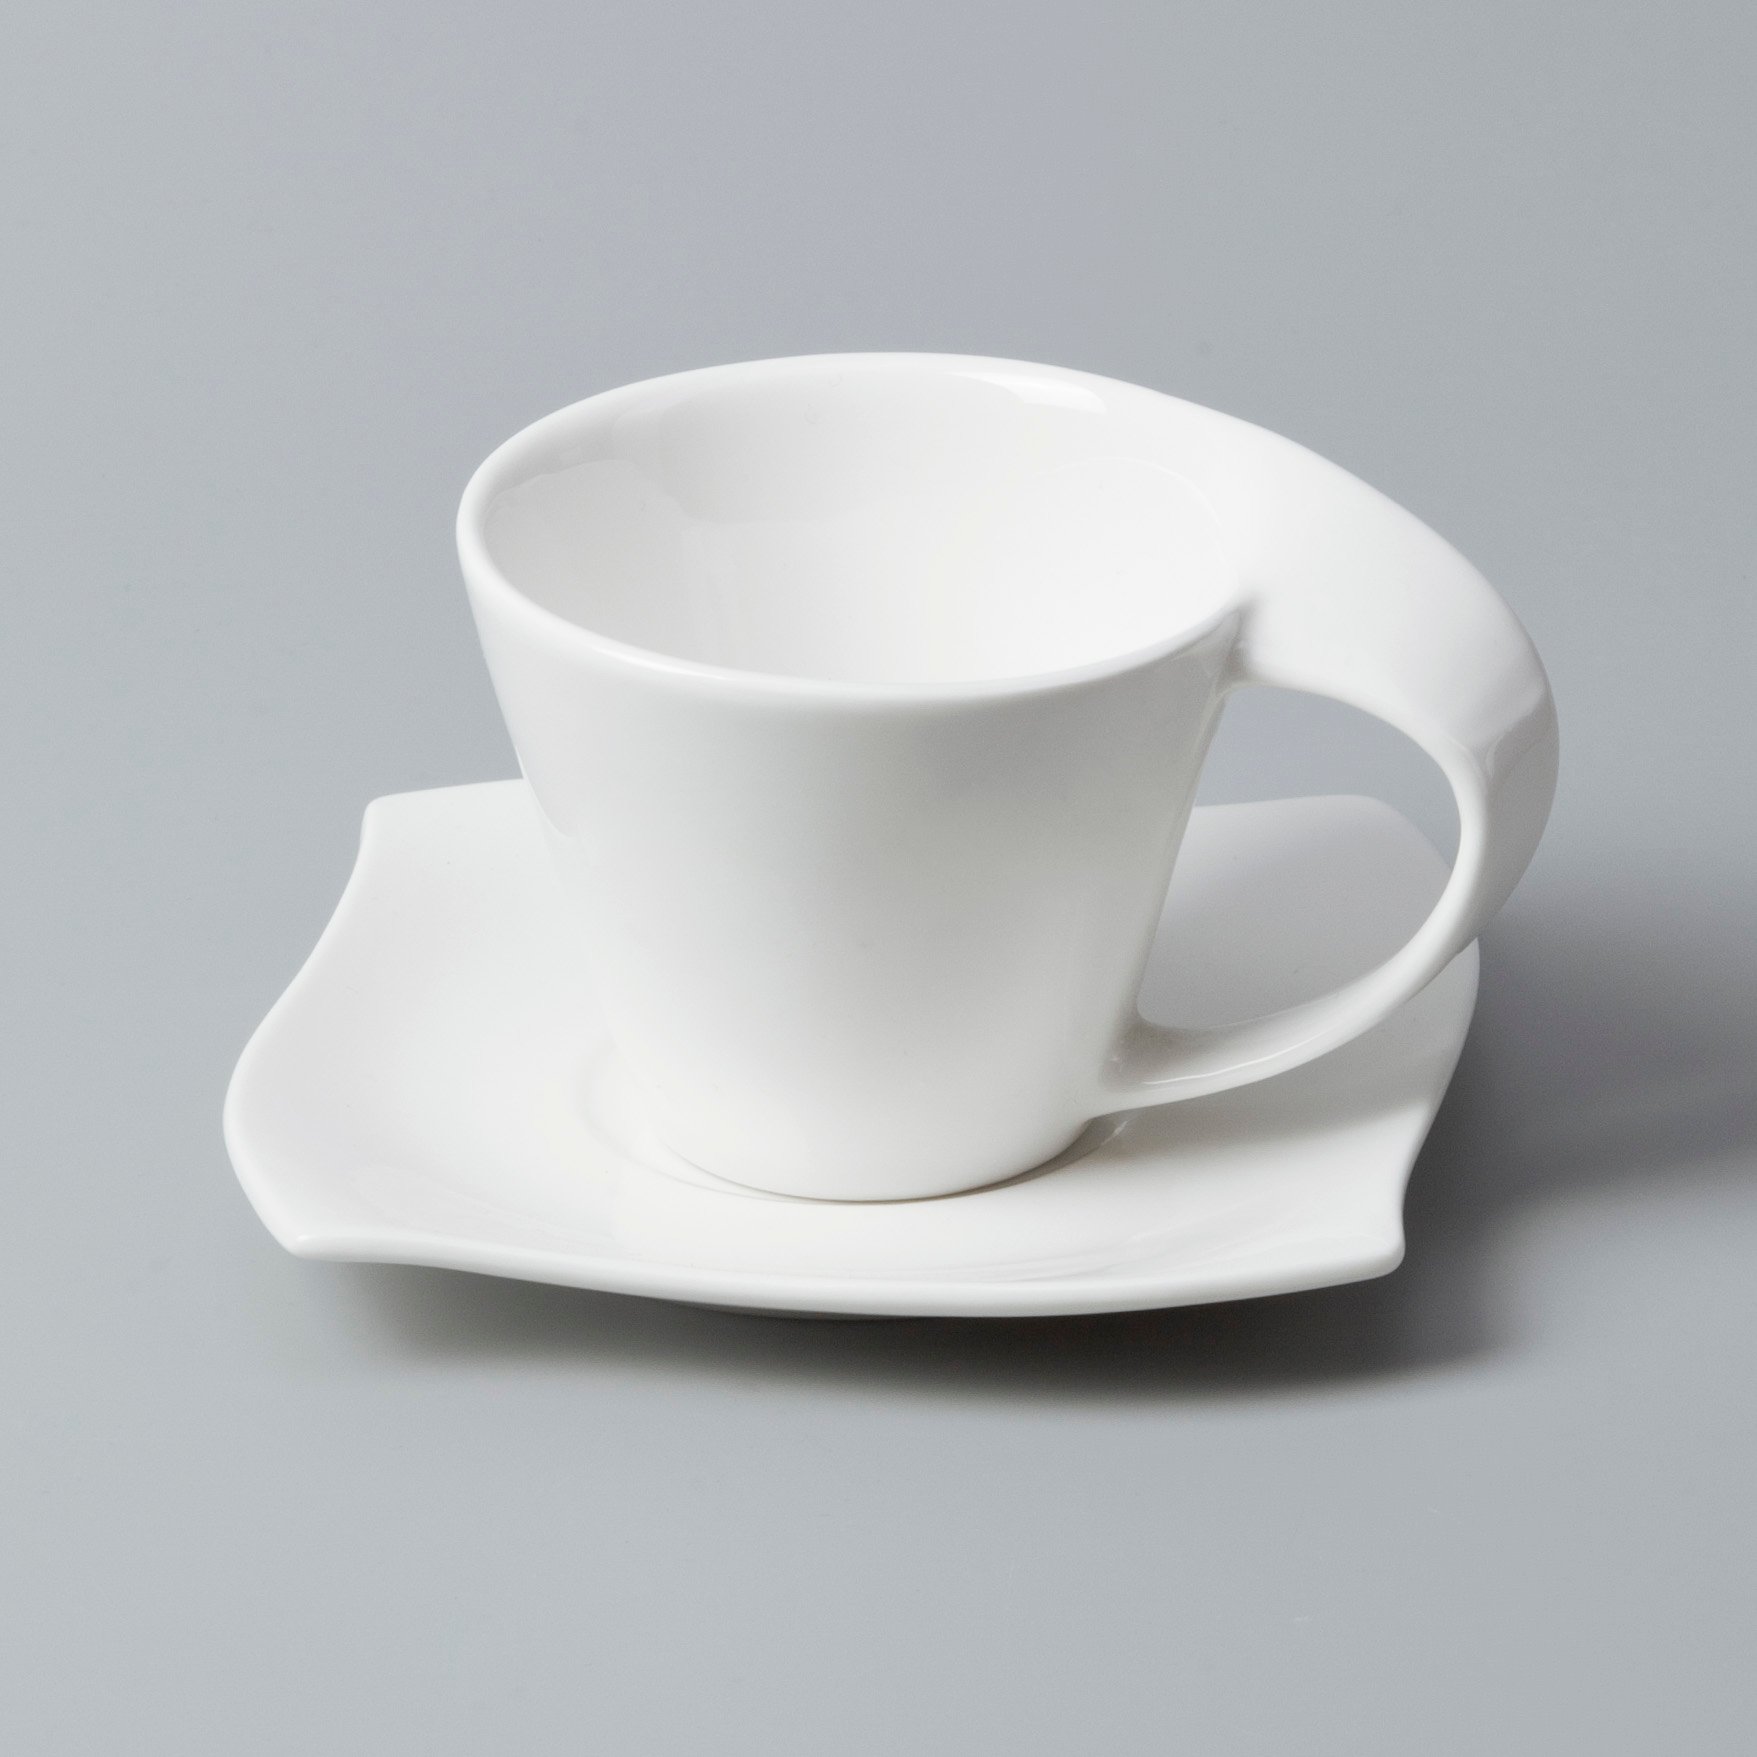 simply fine porcelain plates customized for hotel-10